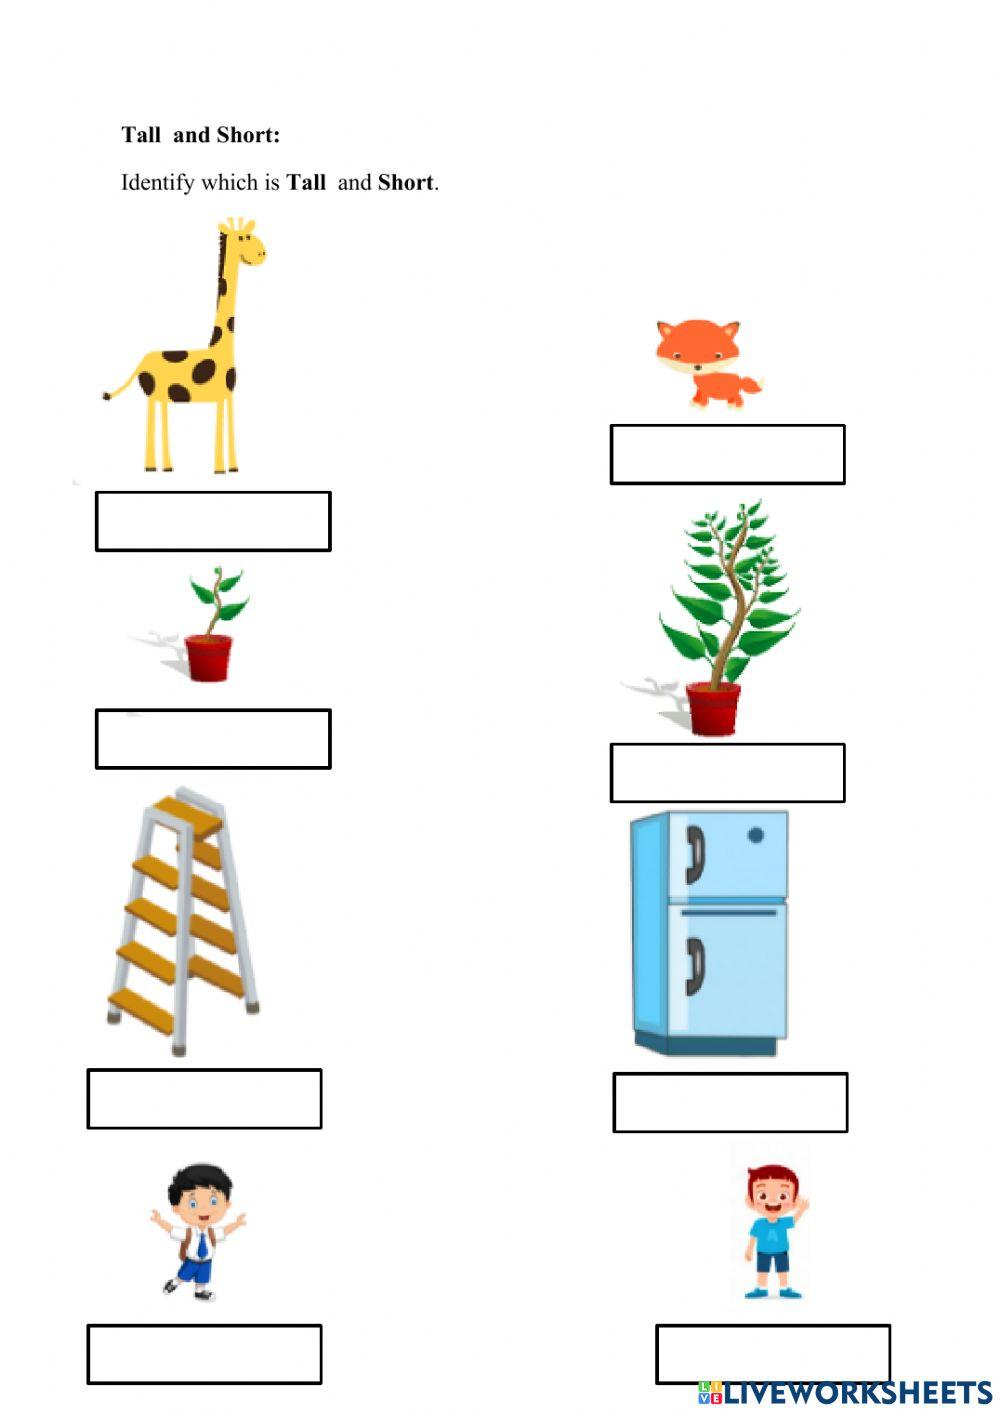 LIVE WORKSHEET P1 ( LONG and SHORT- TALL and SHORT online exercise for